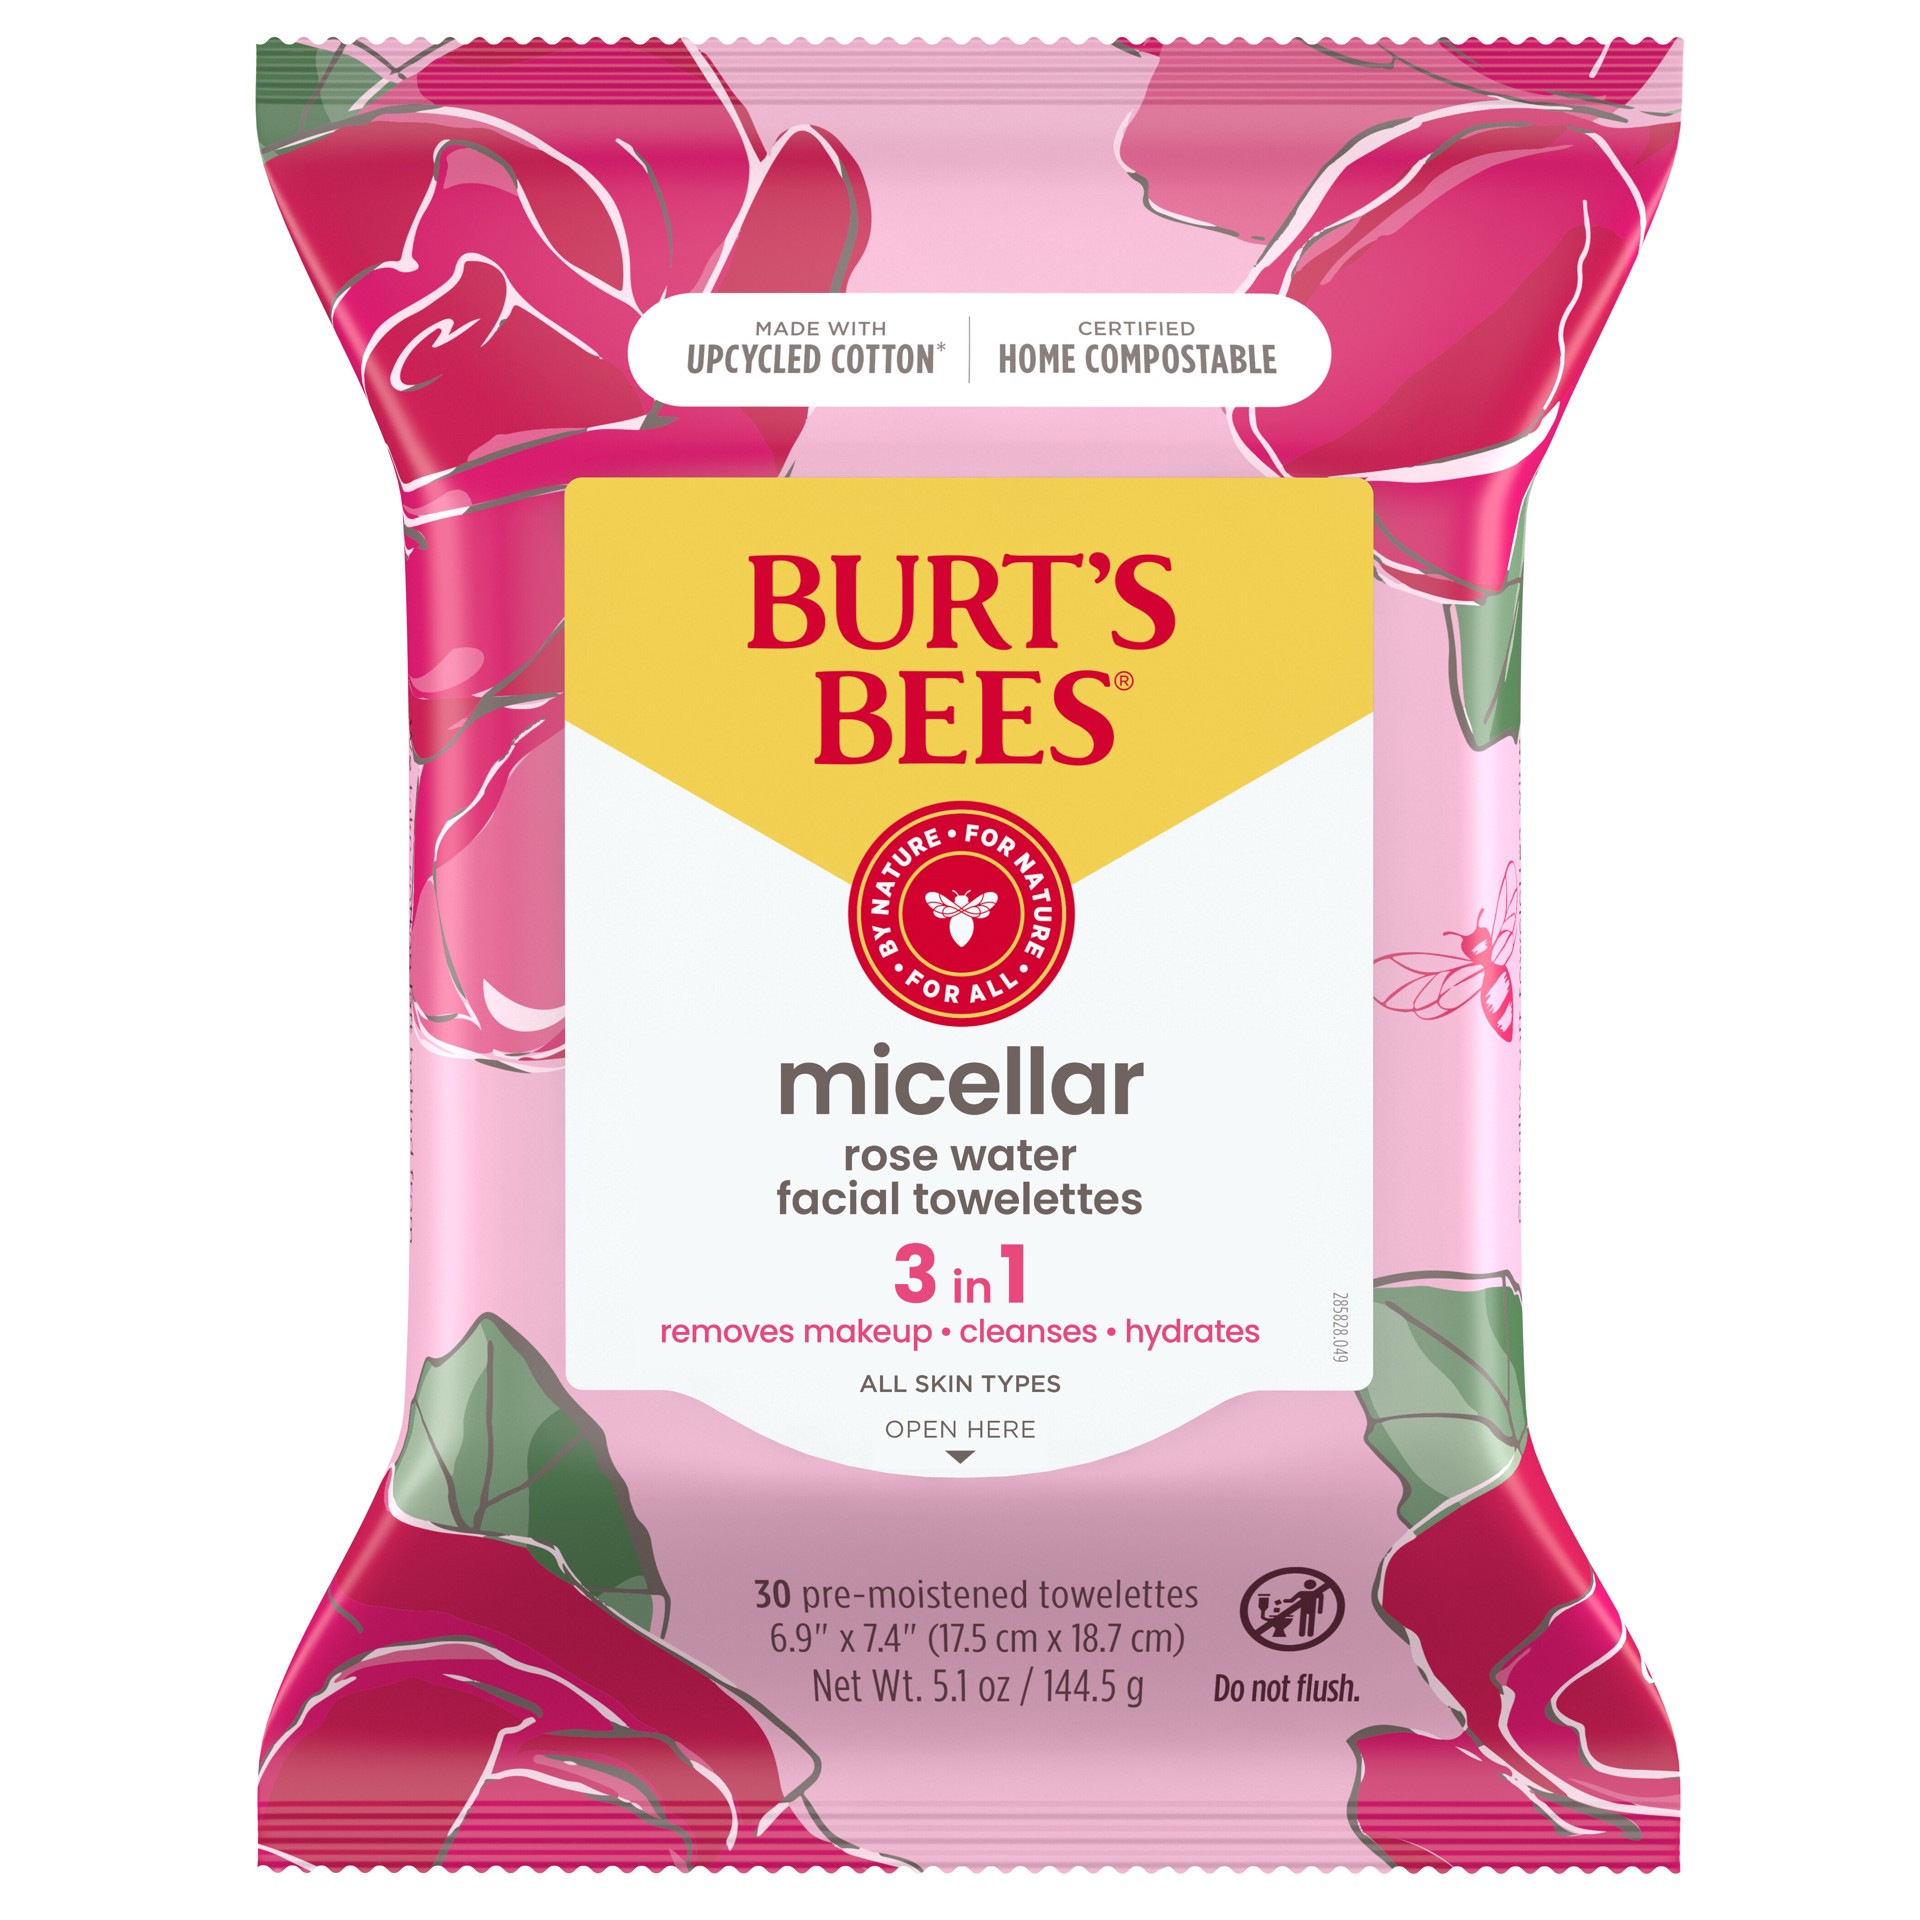 slide 1 of 22, Burt's Bees 3 in 1 Micellar Facial Towelettes with Rose Water 30 ea, 30 cnt